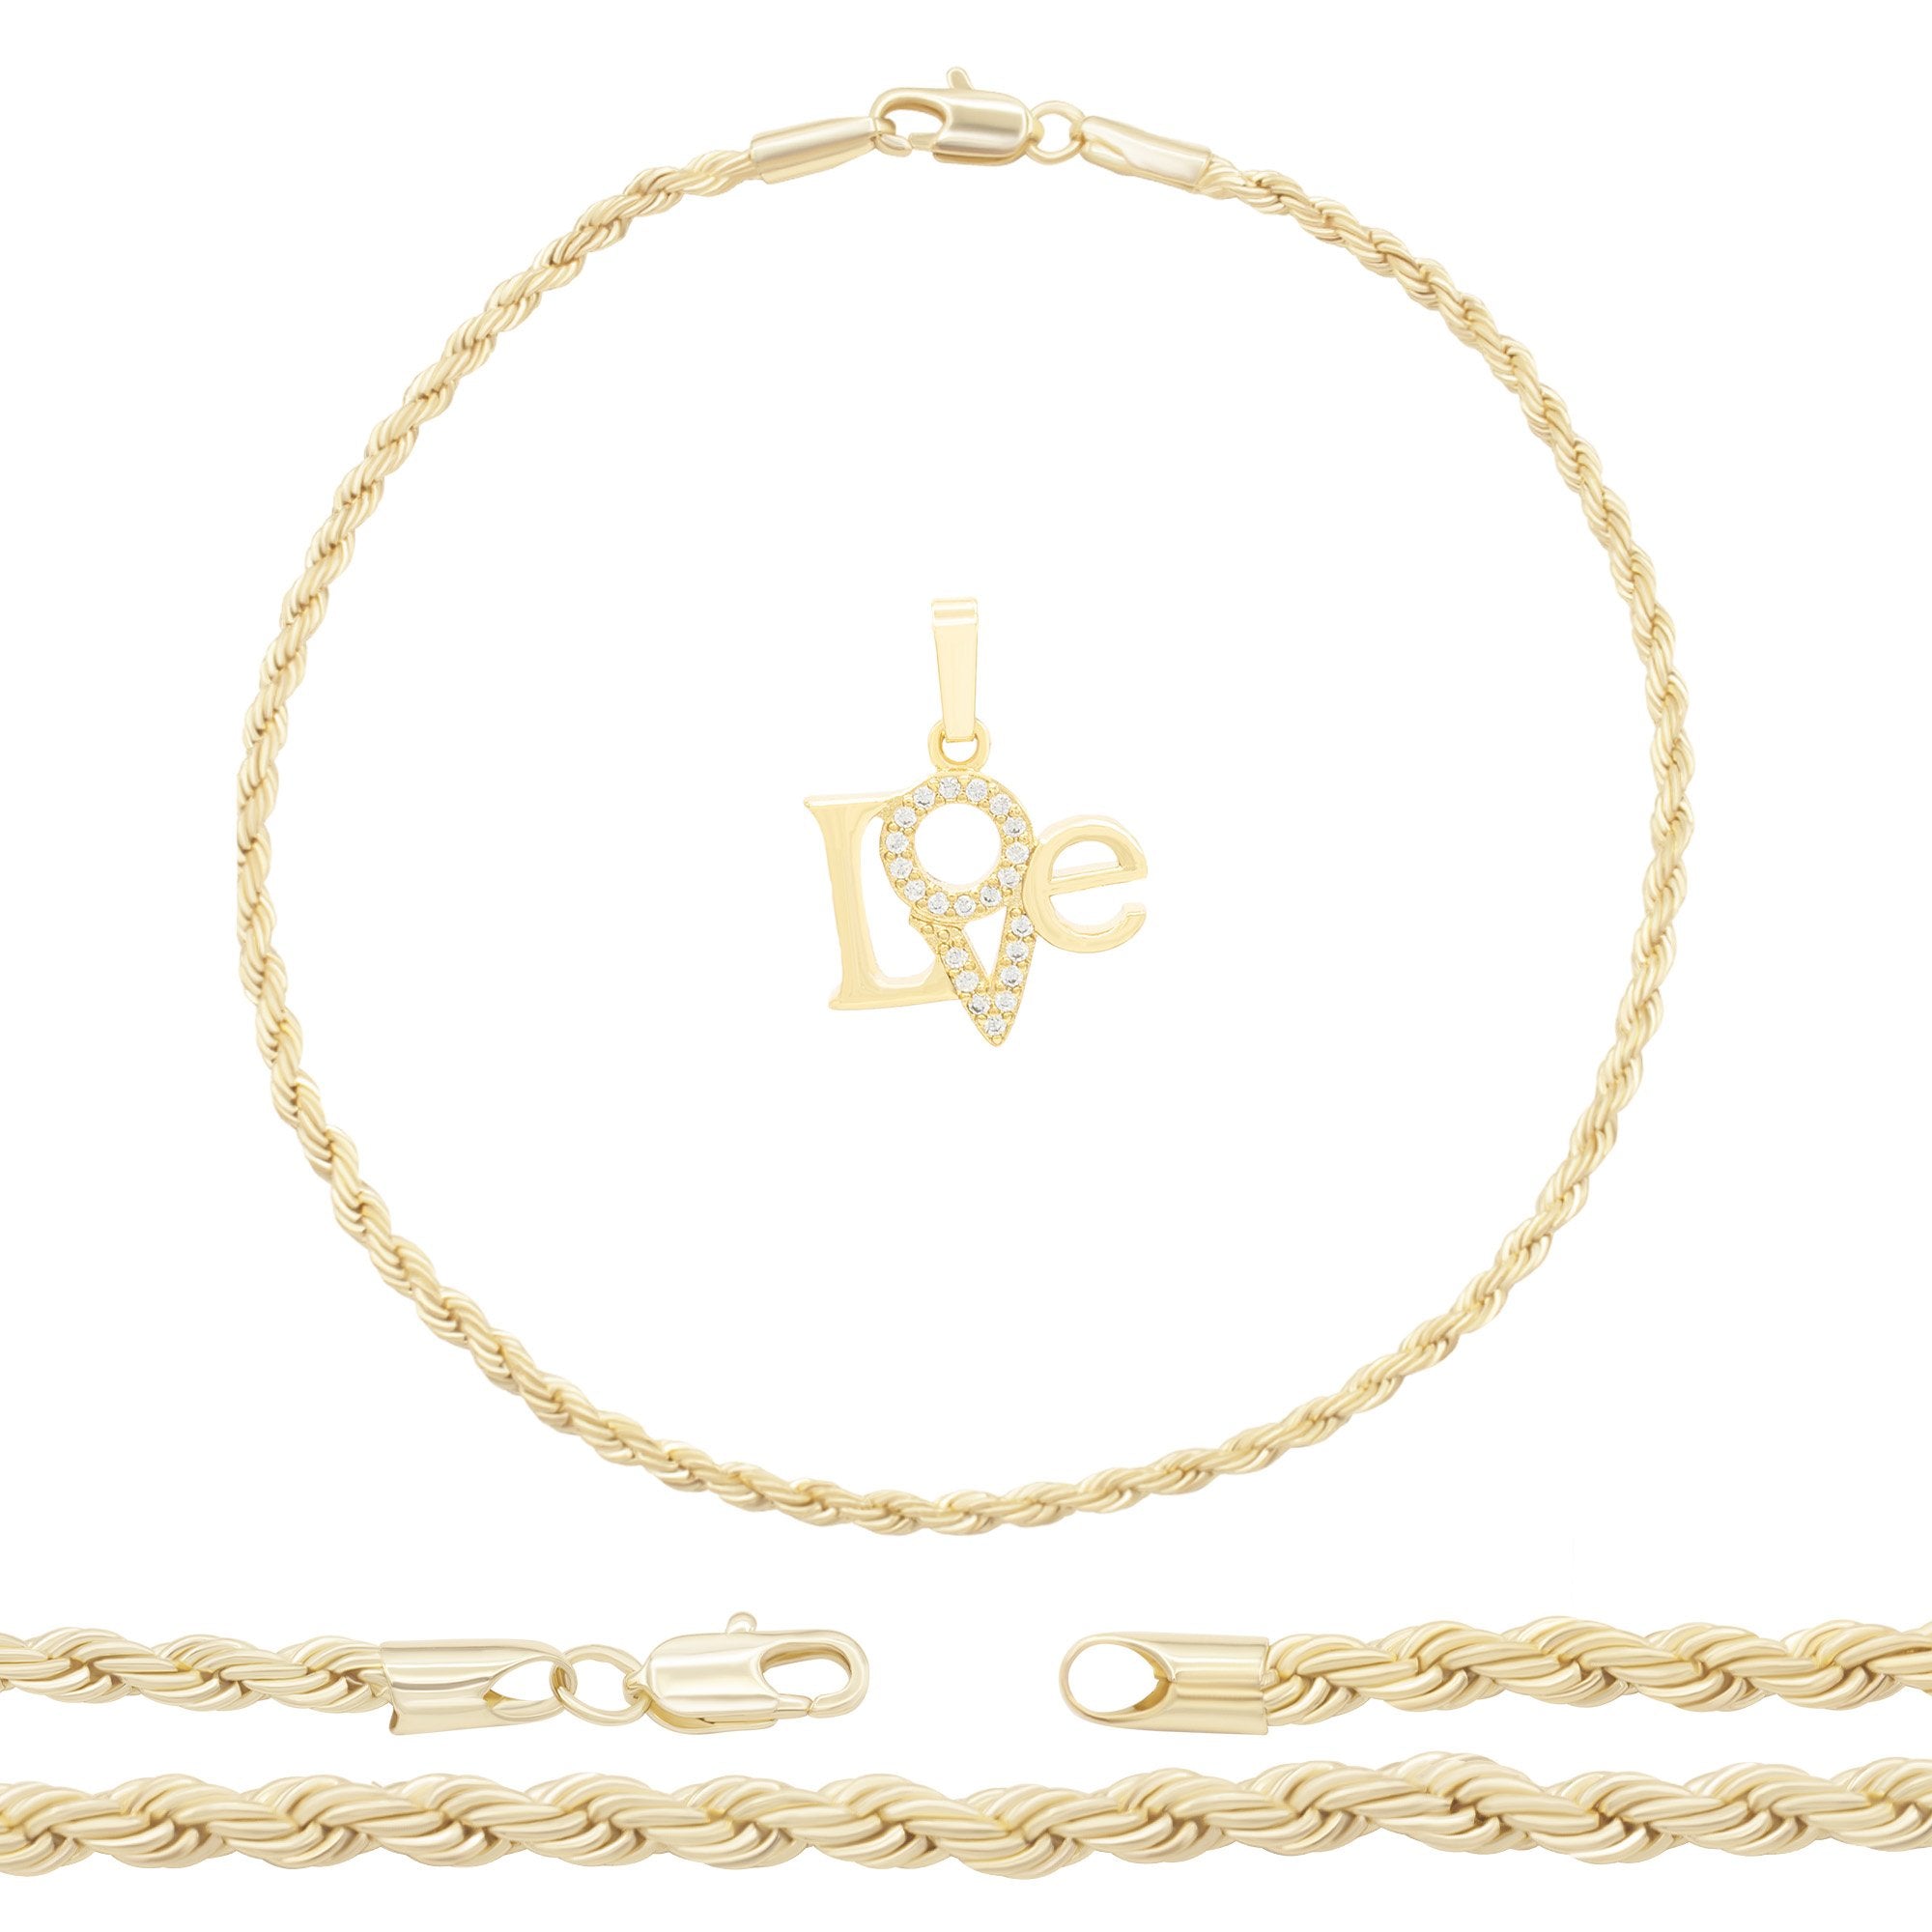 Love 4 Pendant 14K Anklet Gold Filled Cubic Zirconia Charm Rope Chain Set 10" Women Jewelry